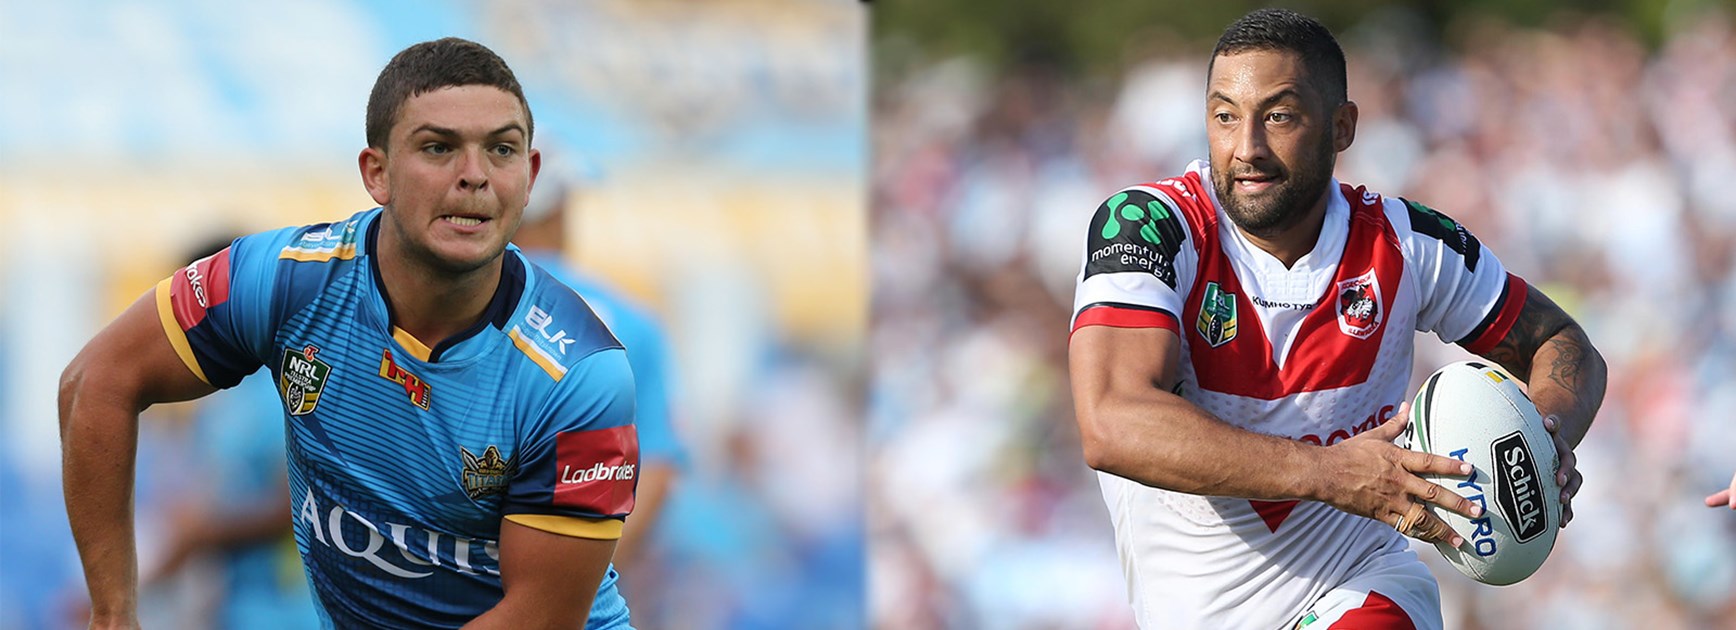 Can Ashley Taylor guide his team to victory, or will Benji Marshall ignite the Dragons faltering attack?